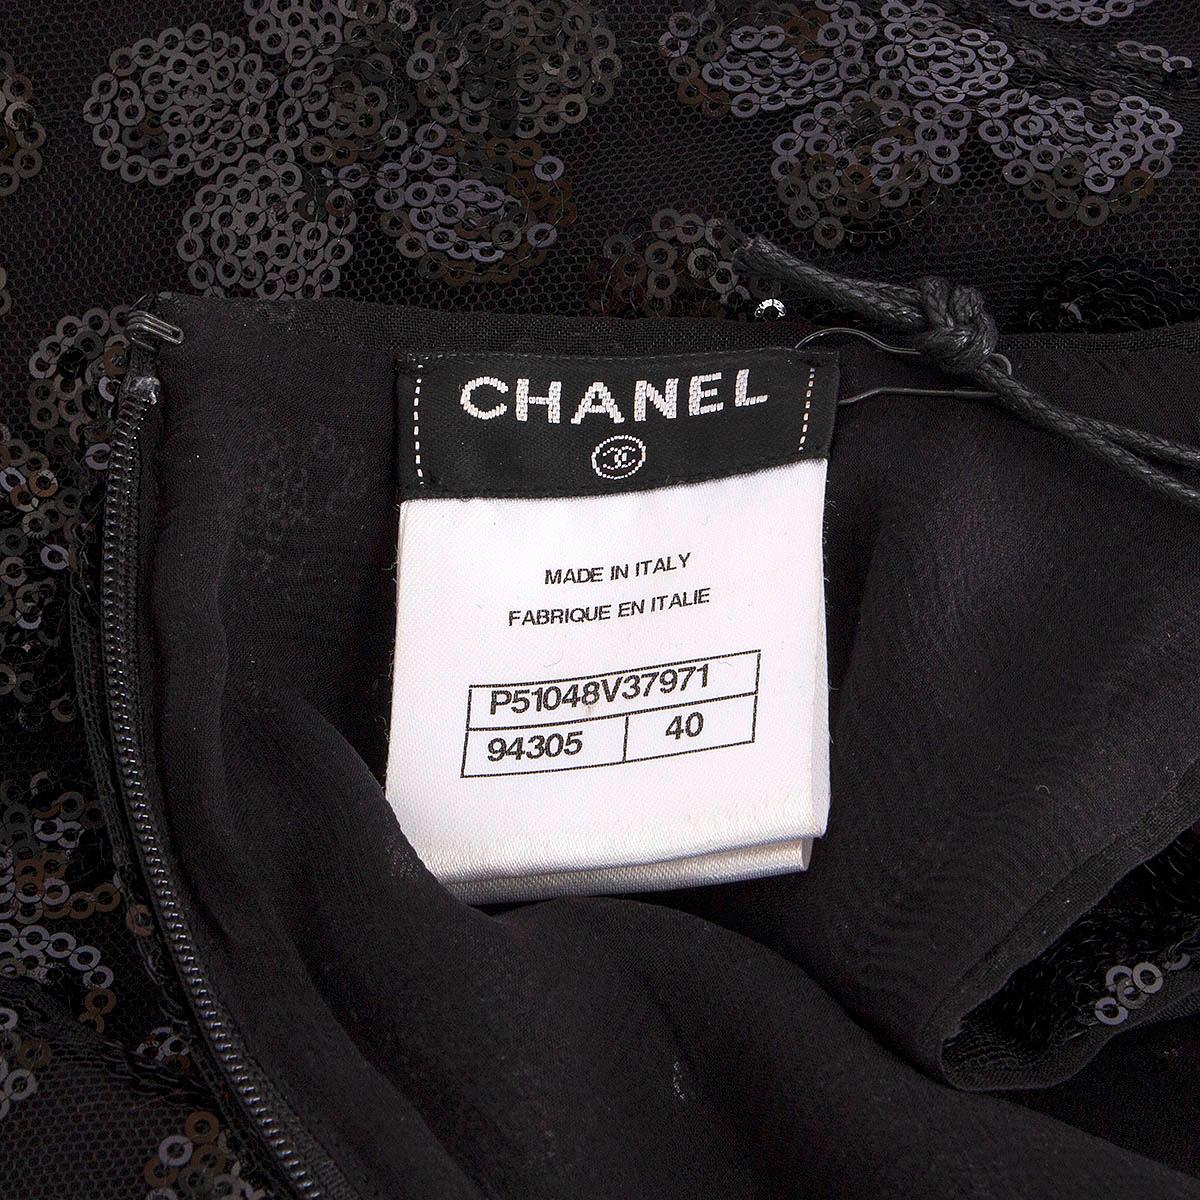 Women's CHANEL black 2015 FLORAL SEQUIN Tank Top Sleeveless Shirt 40 M For Sale